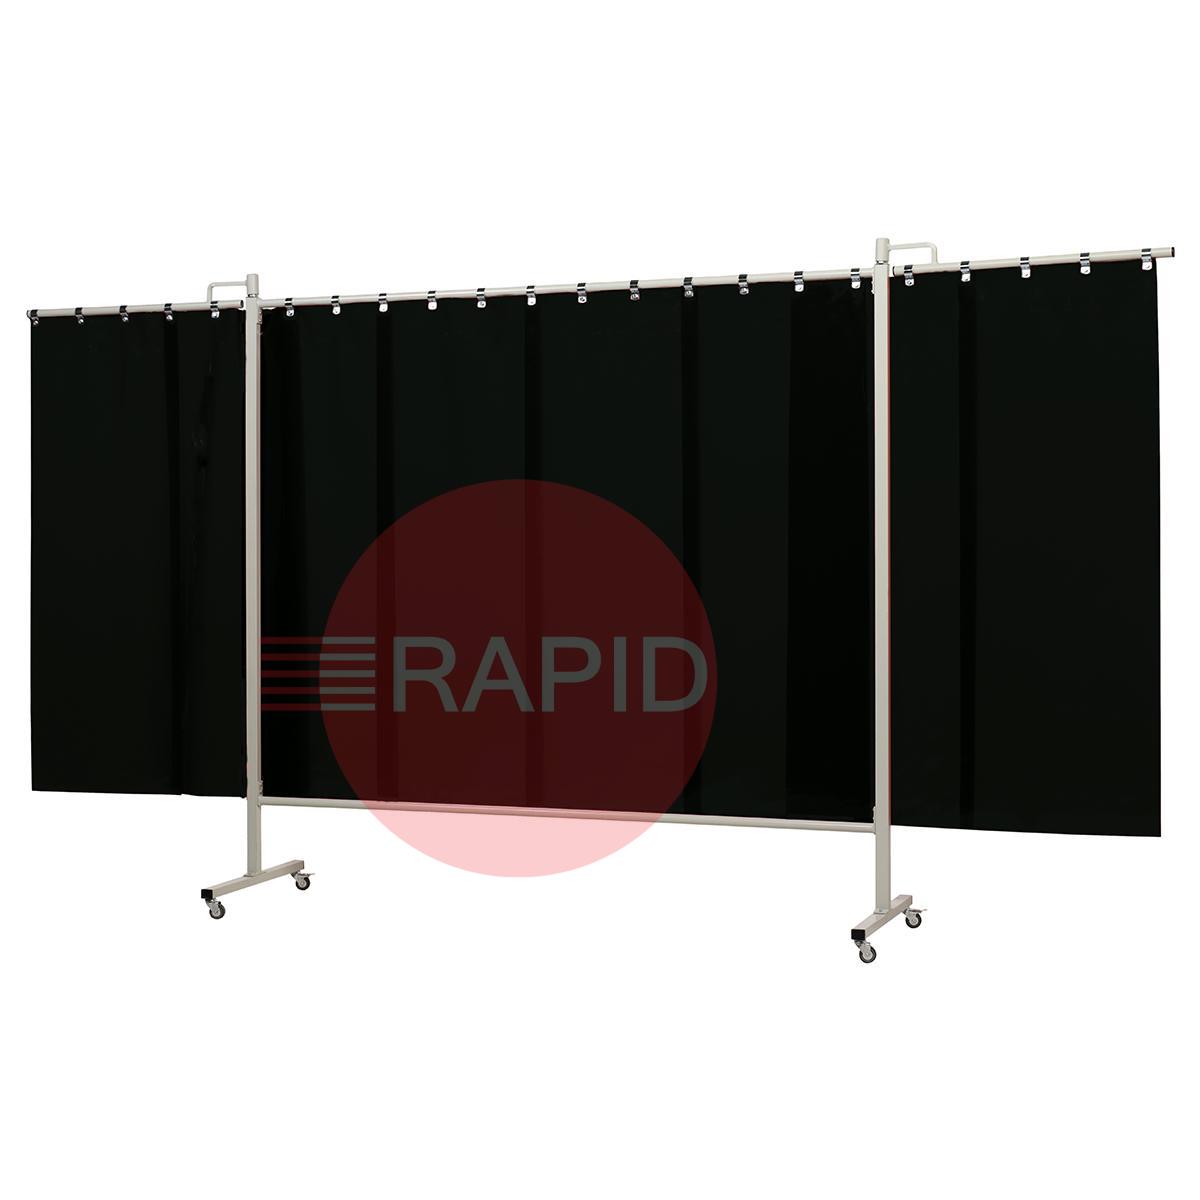 36.36.09  CEPRO Omnium Triptych Welding Screen, with Green-9 Sheet - 3.7m Wide x 2m High, Approved EN 25980